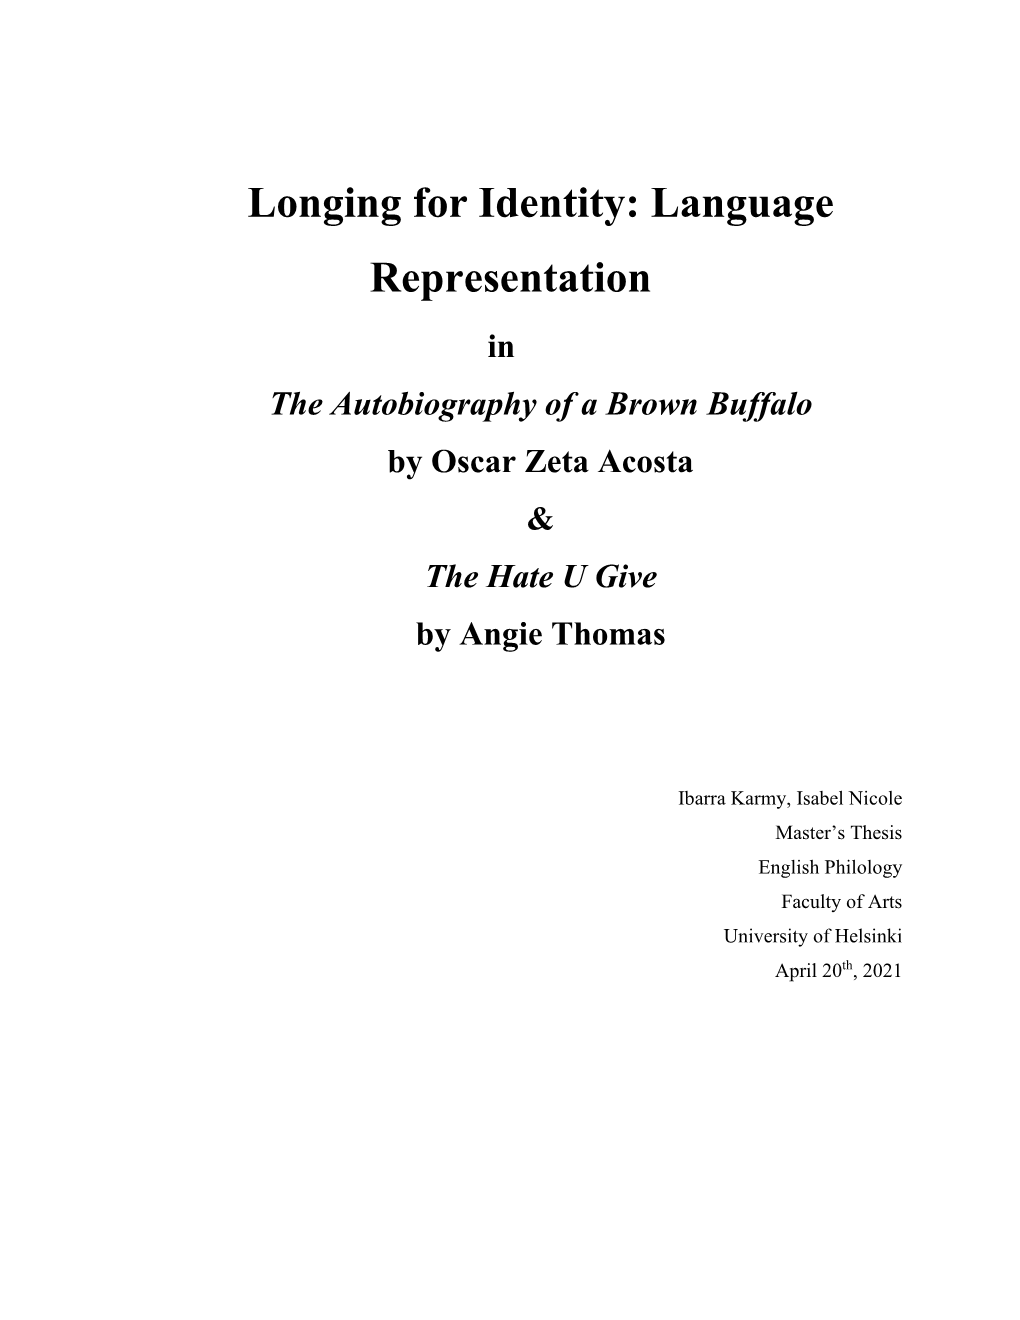 Longing for Identity: Language Representation in the Autobiography of a Brown Buffalo by Oscar Zeta Acosta & the Hate U Give by Angie Thomas